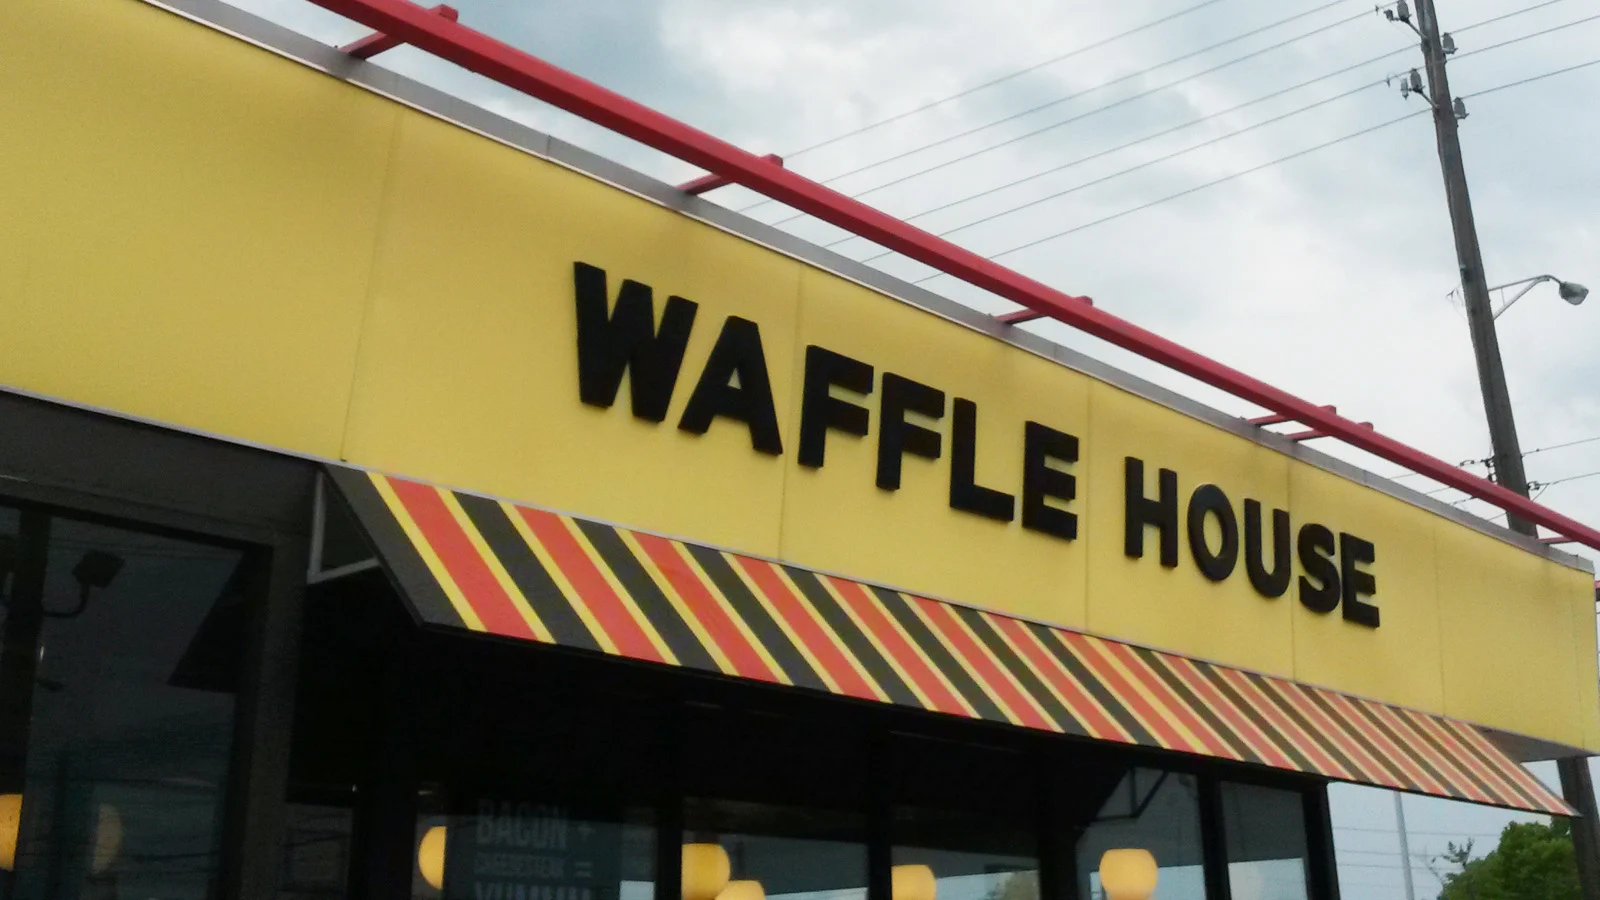 'Waffle House Index' goes Code Red due to COVID-19